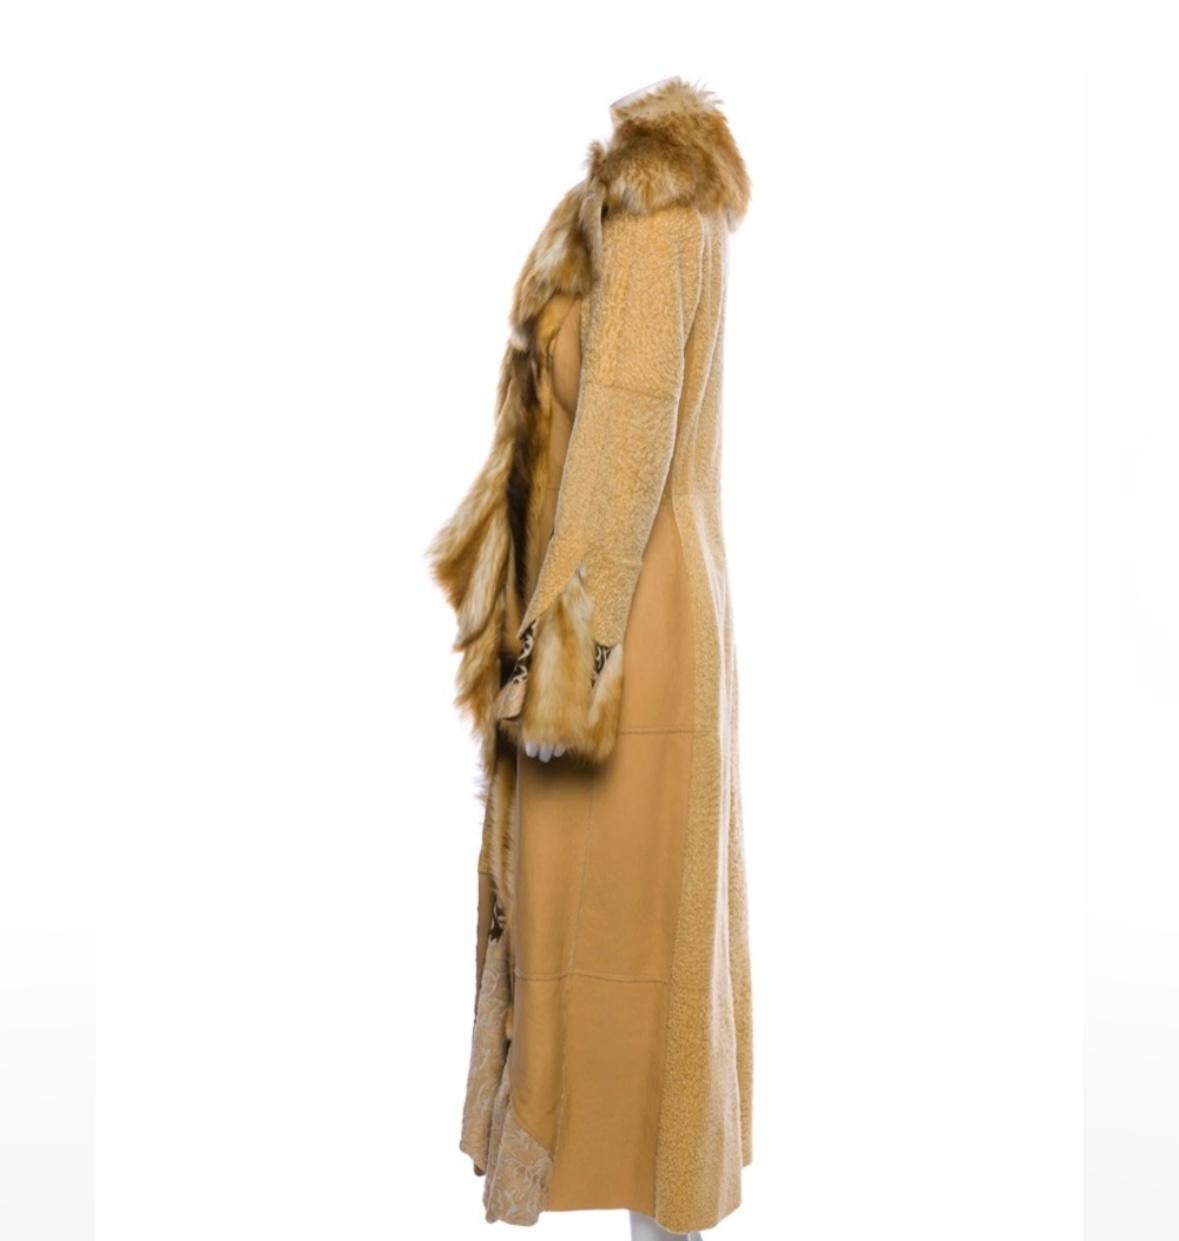 Artico Italian Luxury shearling and leather full length coat 
Truly a masterpiece! 
This is probably the most beautiful coat I’ve even seen. Made extremely well. Definitely not an ordinary piece

Originally $7,000

No size tag, please see